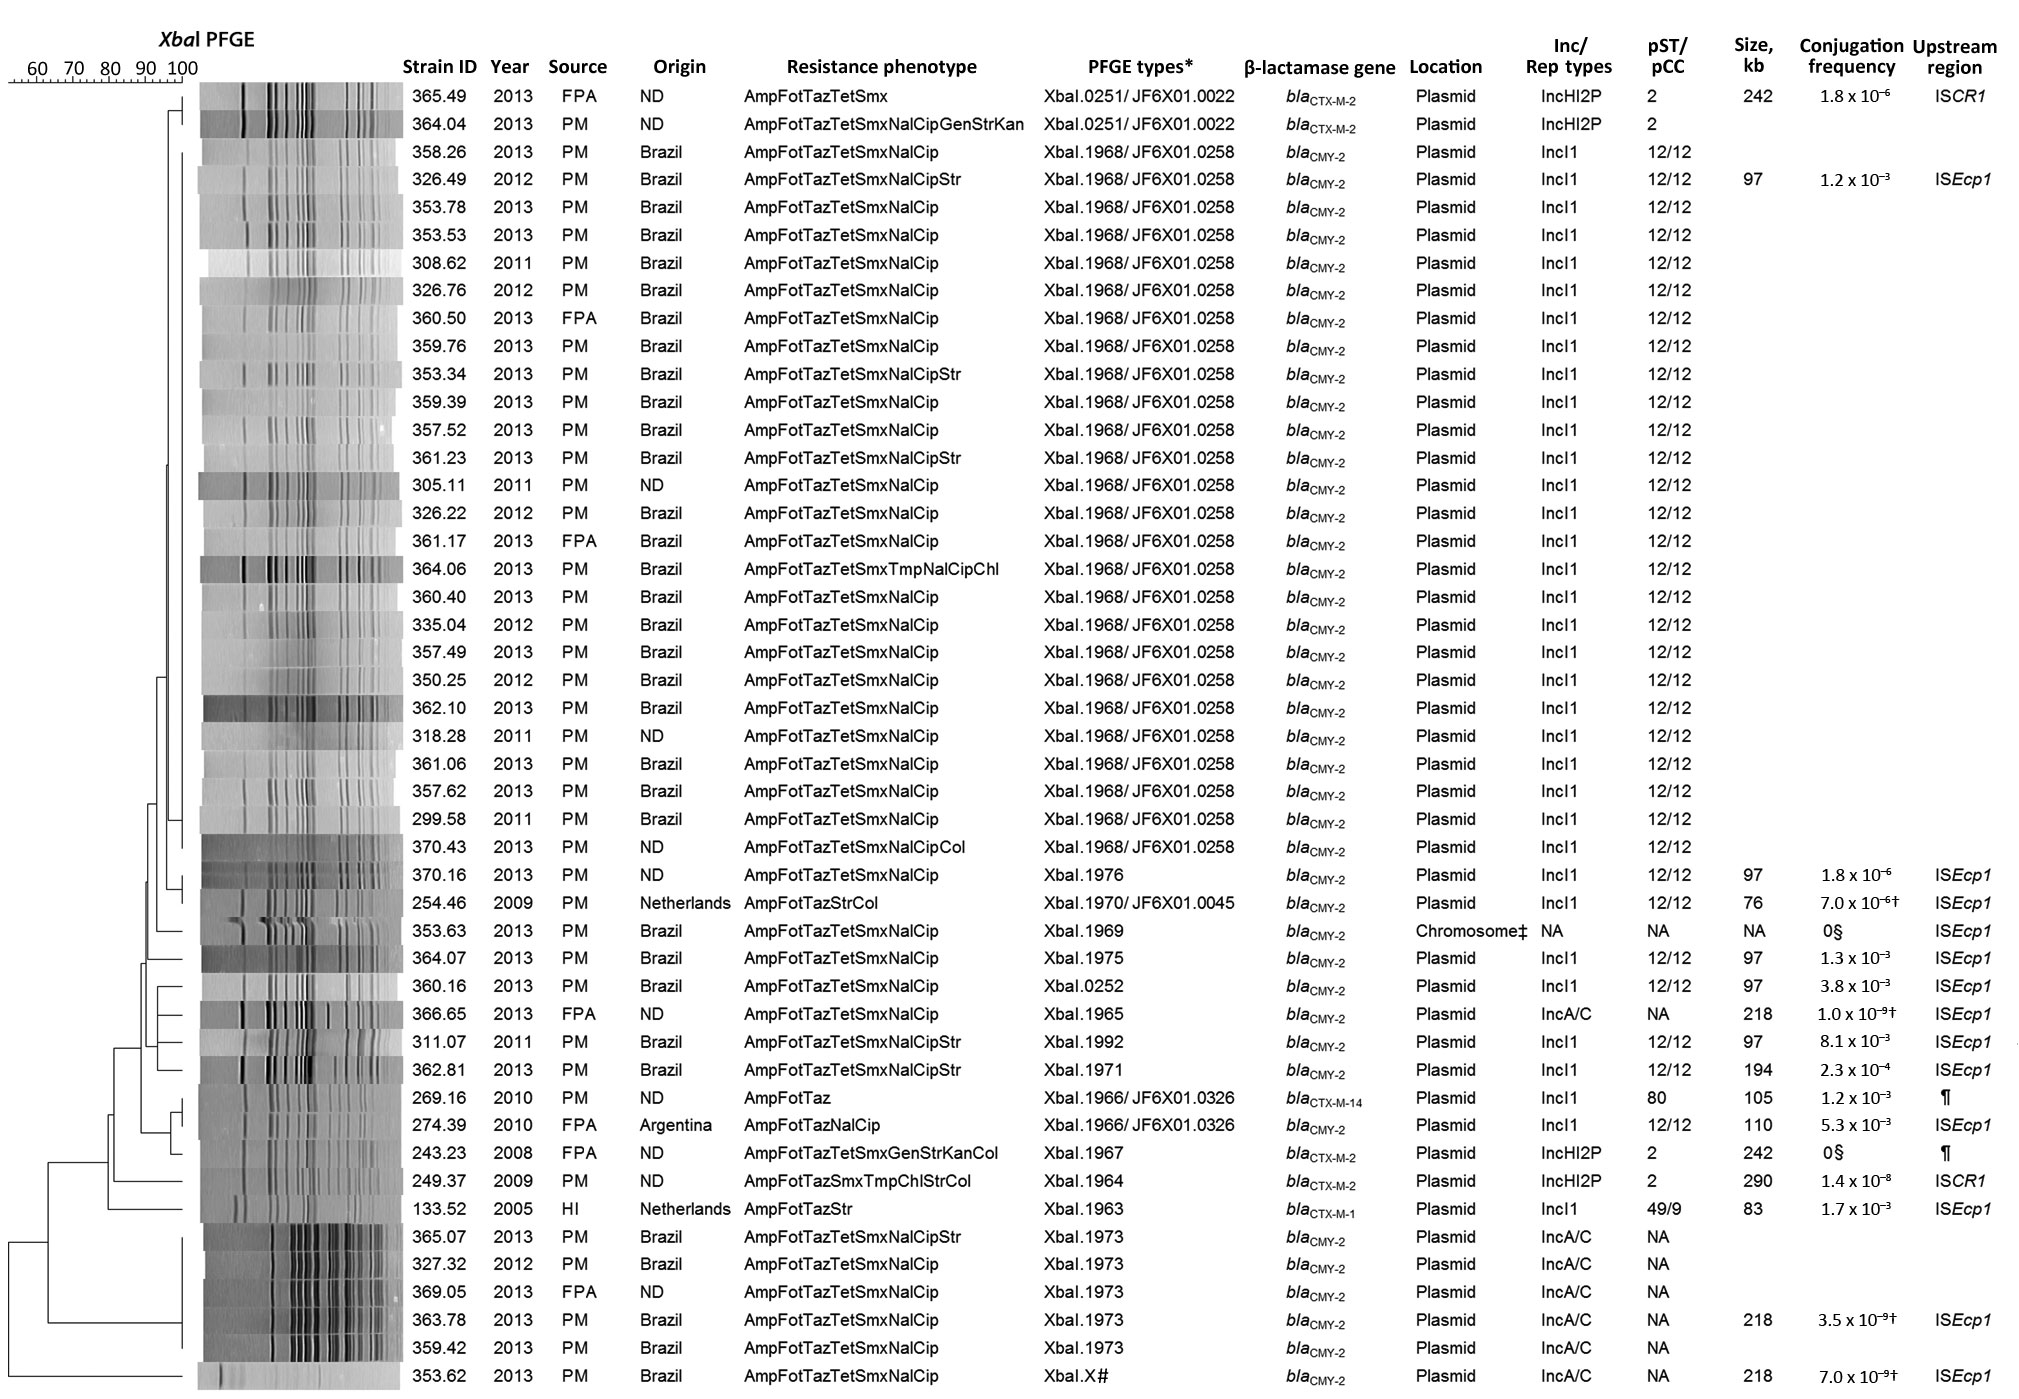 Characteristics of extended-spectrum cephalosporin-resistant Salmonella enterica serovar Heidelberg isolates, the Netherlands, 1999–2013. The dendrogram was generated by using BioNumerics version 6.6 (Applied Maths, Sint-Martens-Latem, Belgium) and indicates results of a cluster analysis on the basis of XbaI–pulsed-field gel electrophoresis (PFGE) fingerprinting. Similarity between the profiles was calculated with the Dice similarity coefficient and used 1% optimization and 1% band tolerance as 